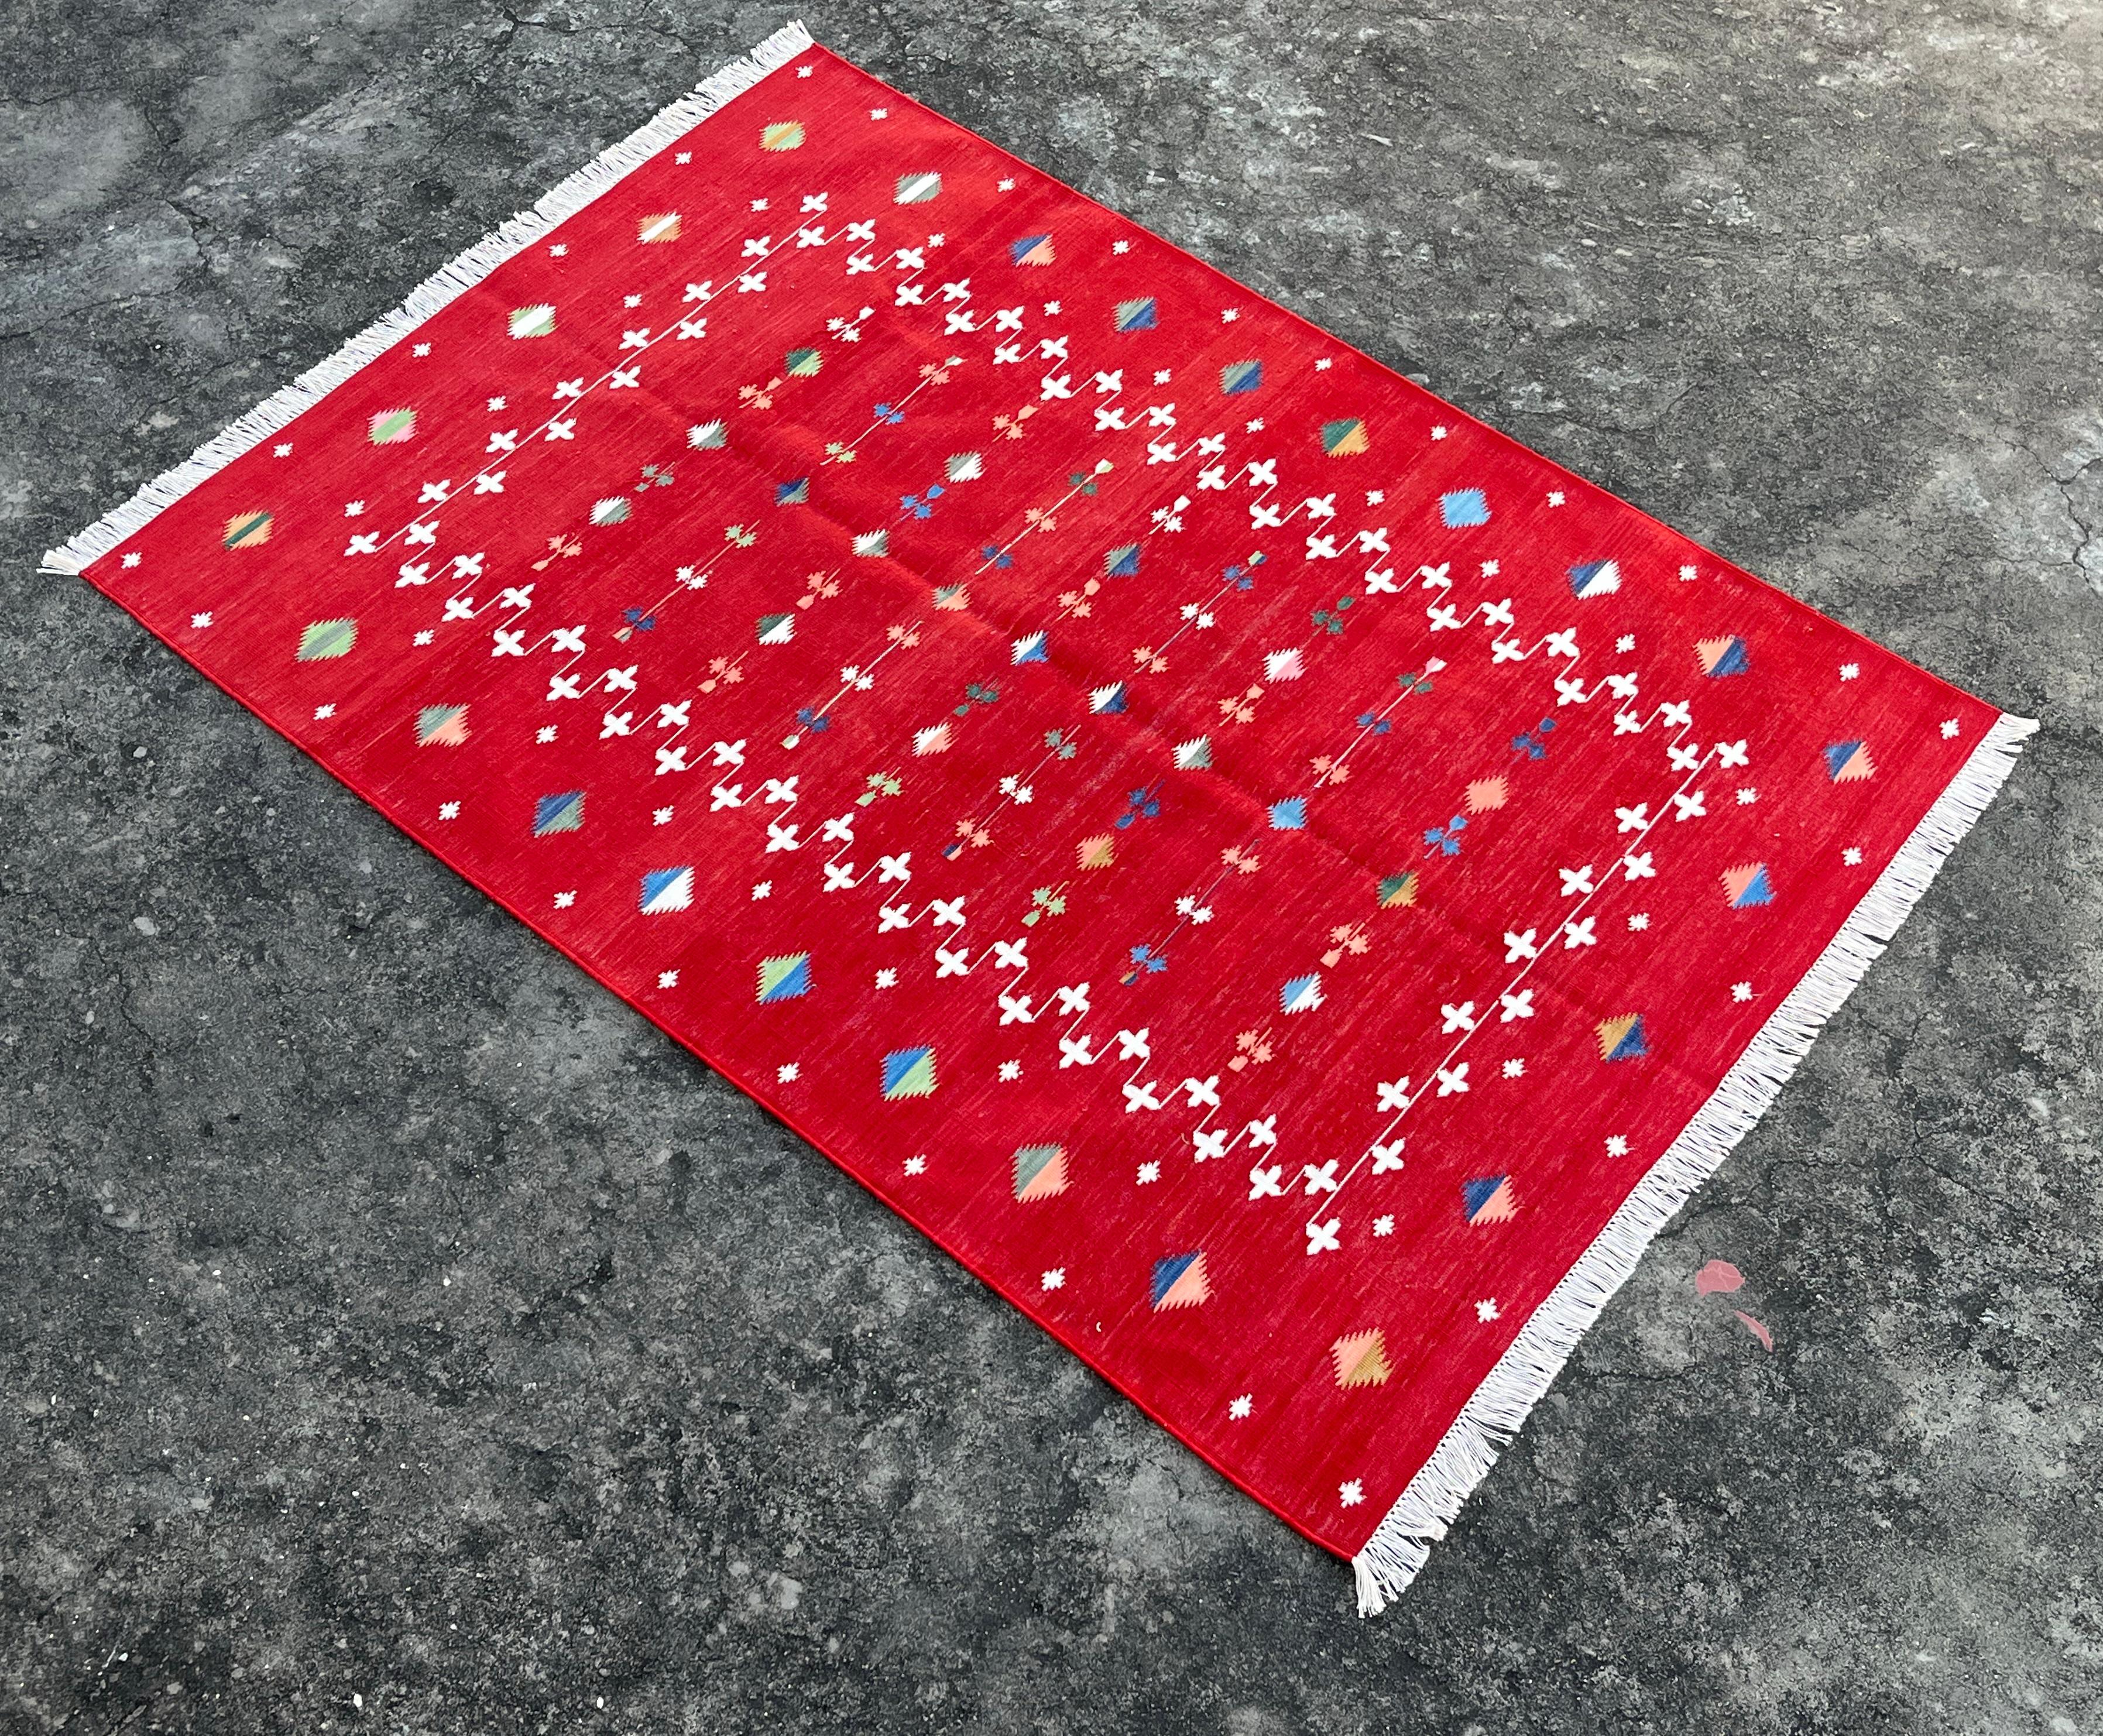 Handmade Cotton Area Flat Weave Rug, 4x6 Red And White Shooting Star Dhurrie Rug For Sale 4